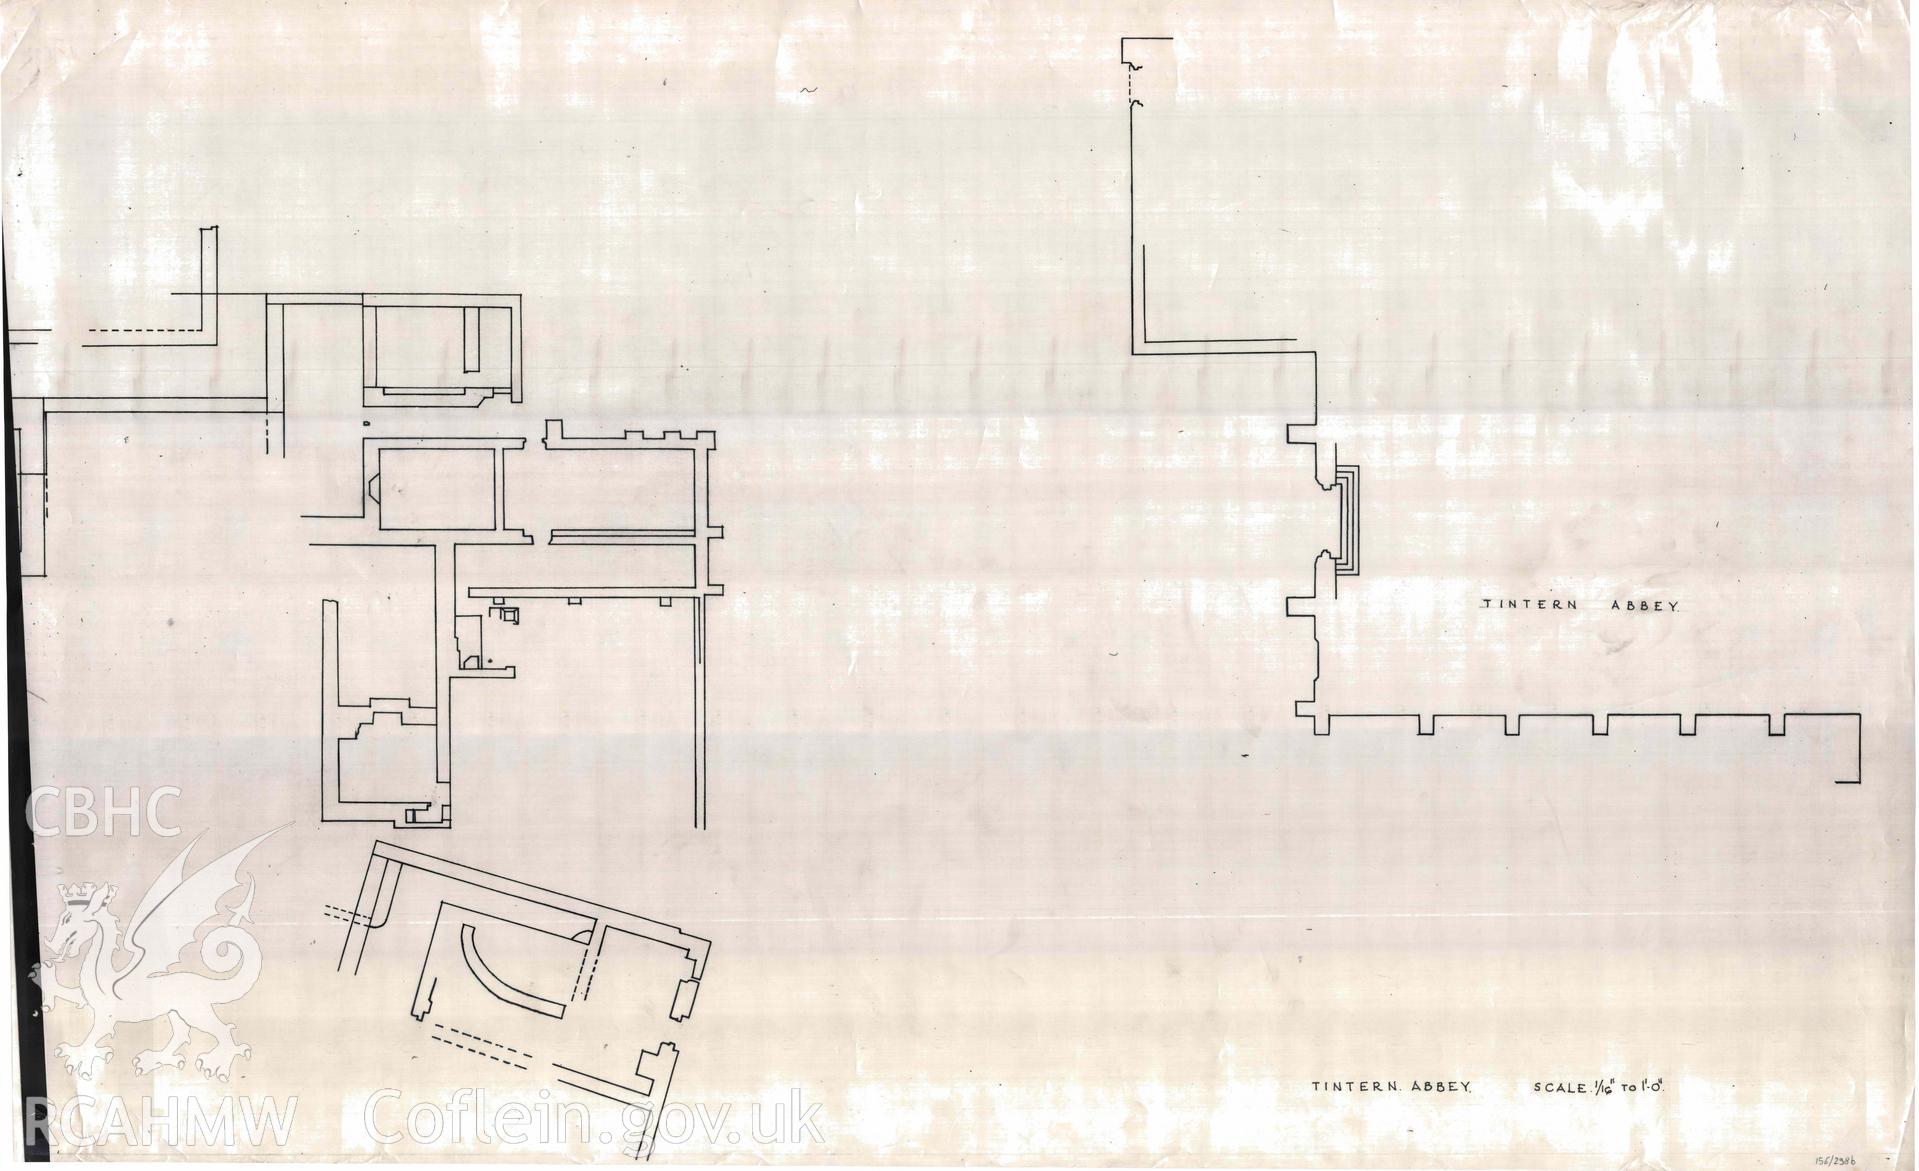 Cadw guardianship monument drawing, plan of part of buildings opposite west entrance of the church, Tintern Abbey.  Undated.